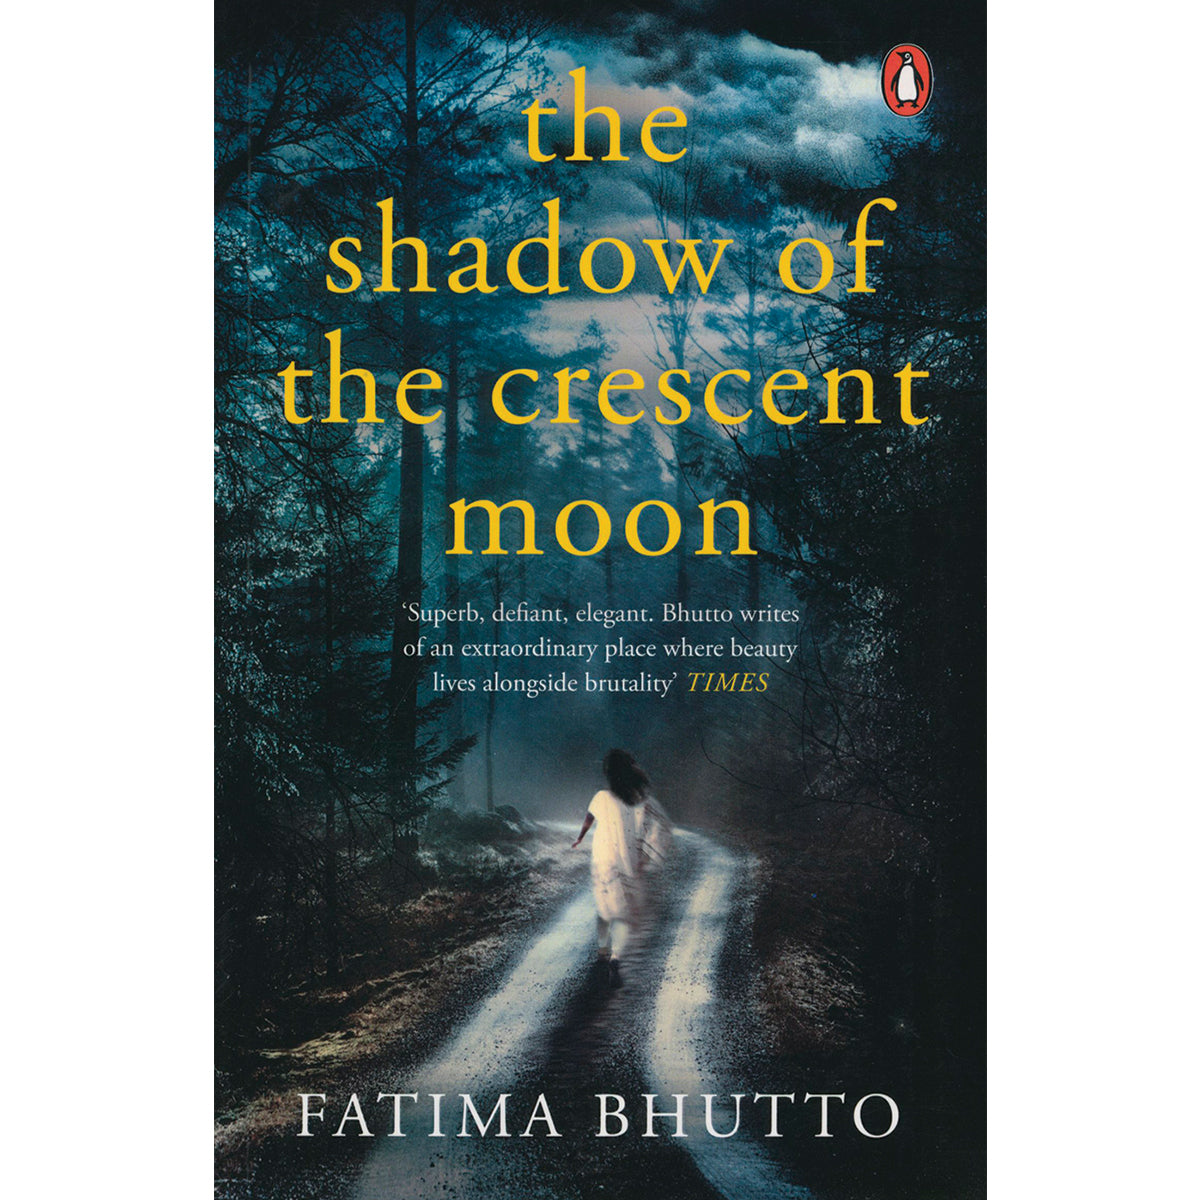 The Shadow of the Crescent Moon by Fatima Bhutto